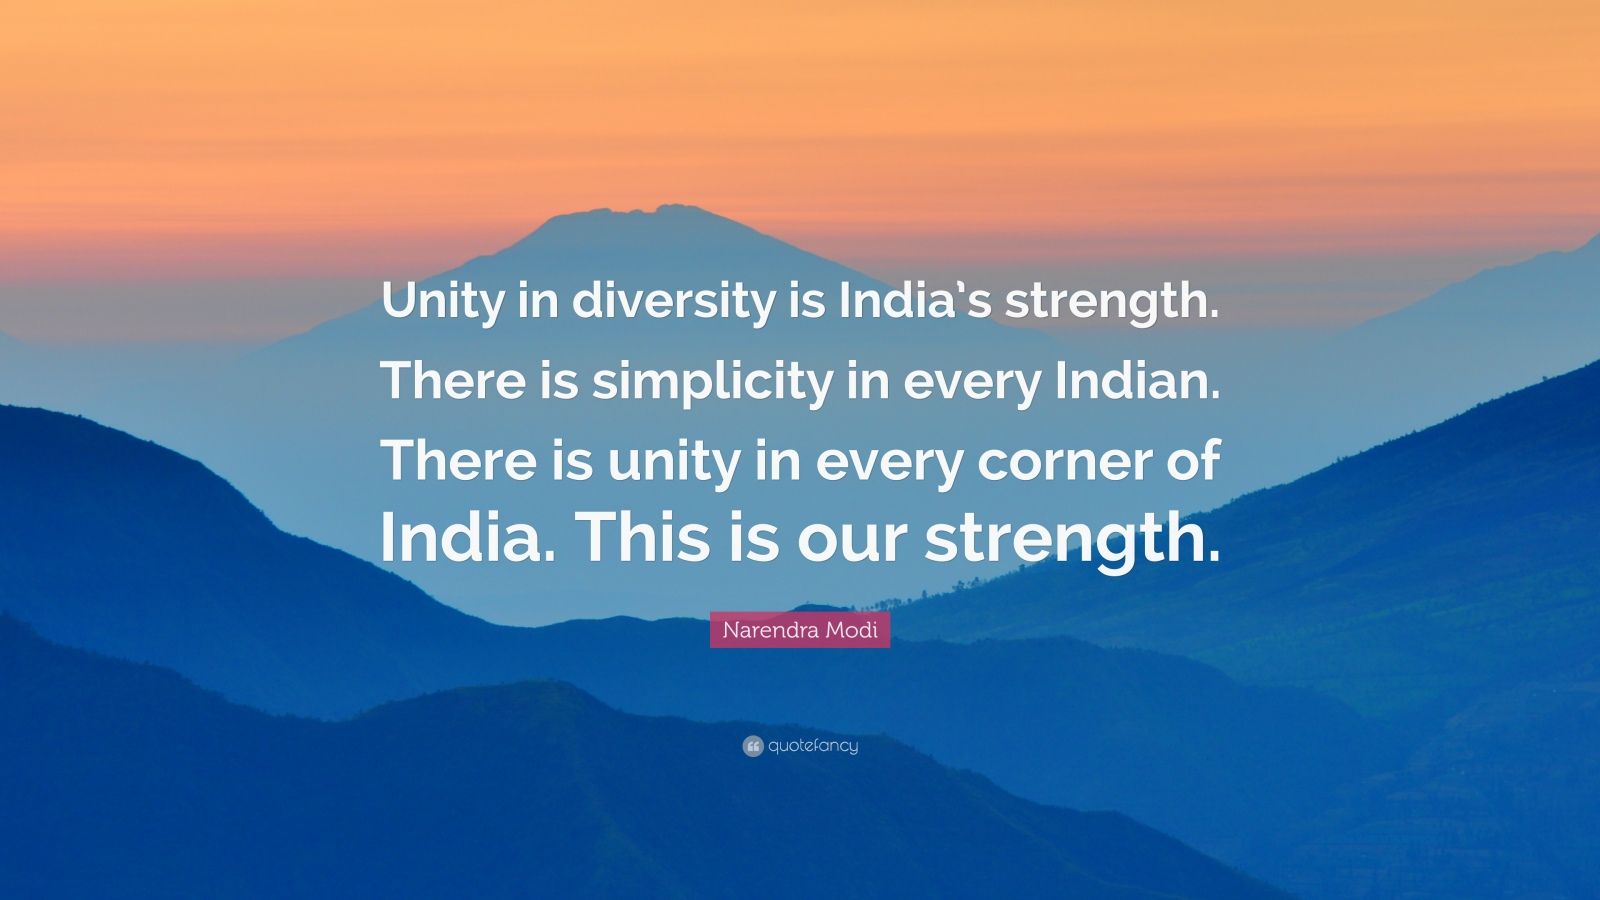 Narendra Modi Quote: “Unity in diversity is India’s strength. There is